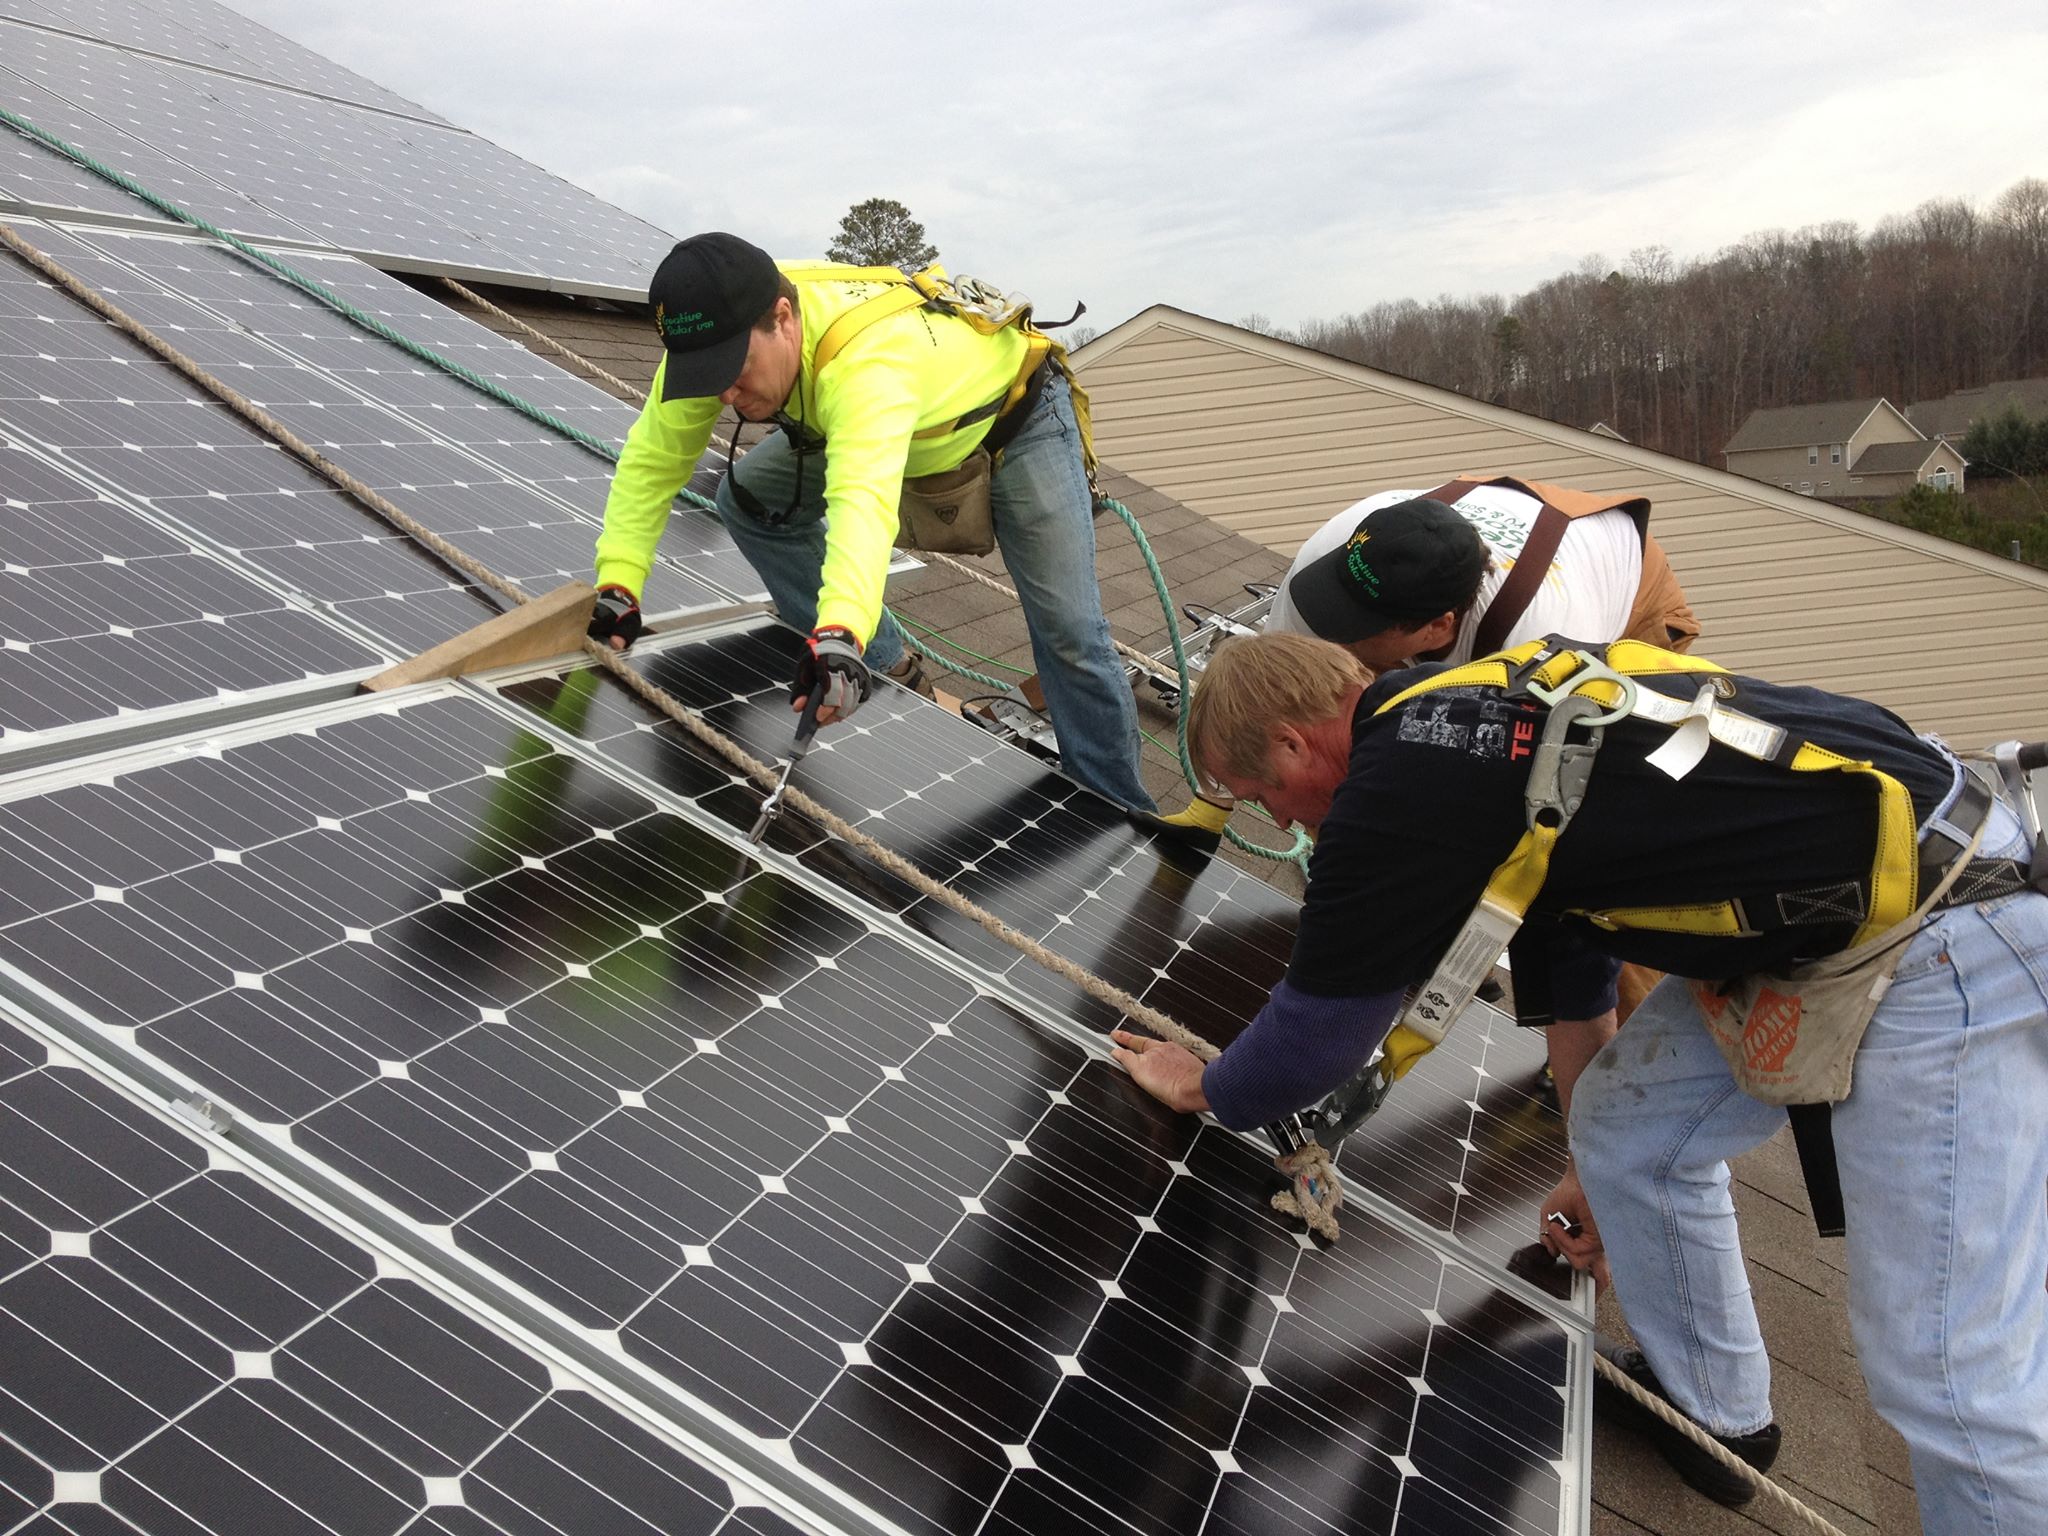 Big Rush for Solar Panel Installation Training Classes as Demand Grows for Professionals